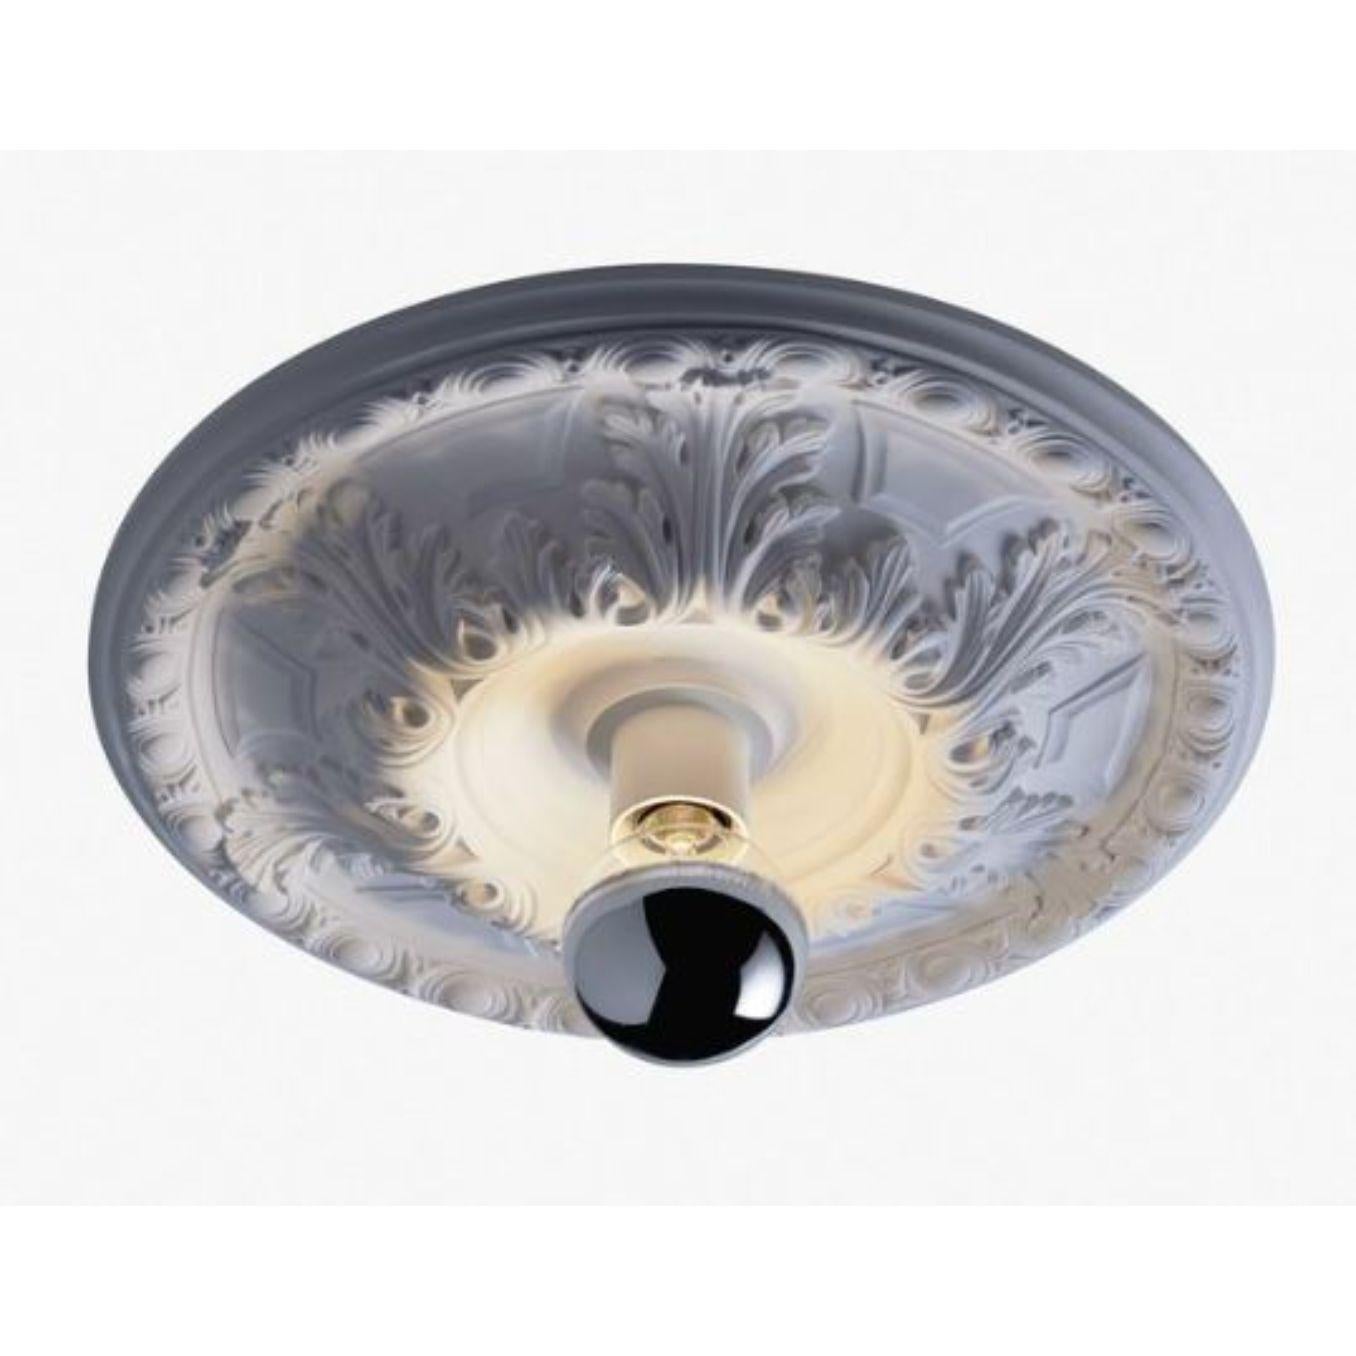 Large Solferino ceiling light by Radar
Design: Bastien Taillard.
Materials: Metal, plaster of Paris, fiberglass.
Dimensions: W 72.5 x D 72.5 x H 15 cm.
Also Available with a double layer of mat white paint or in raw plaster ready to paint. Bulb